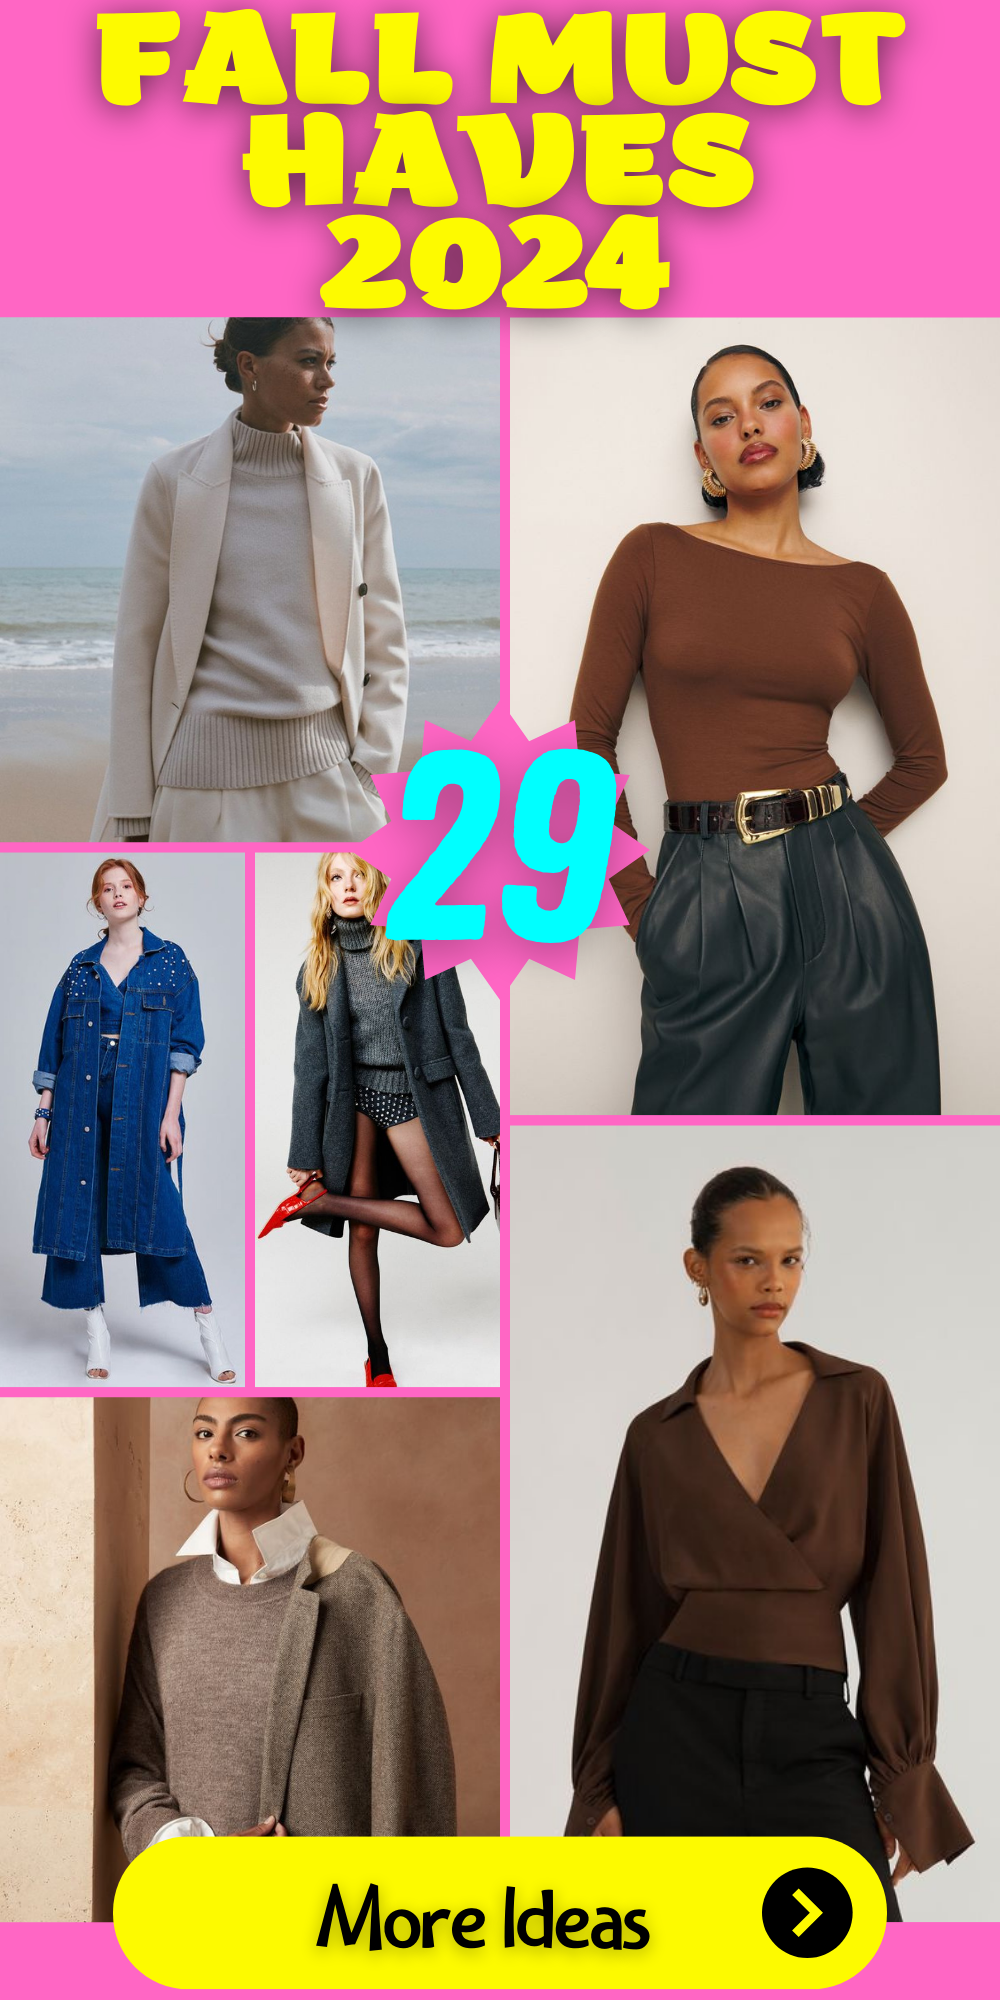 29 Fall Must-Haves for 2024: Essential Fashion and Accessories